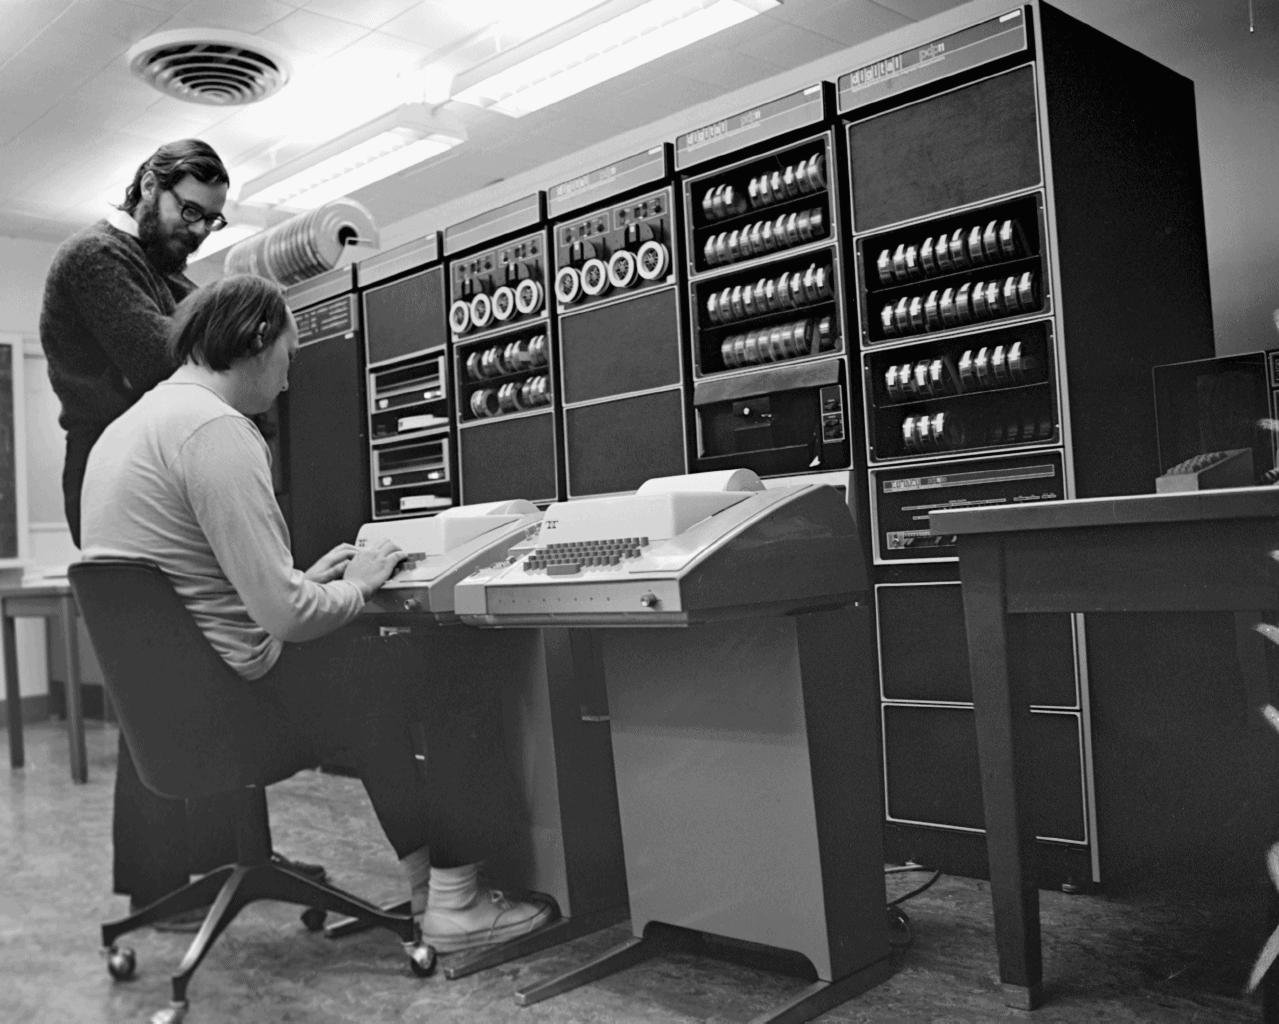 Ken Thompson and Dennis Ritchie at the PDP-11 in 1972